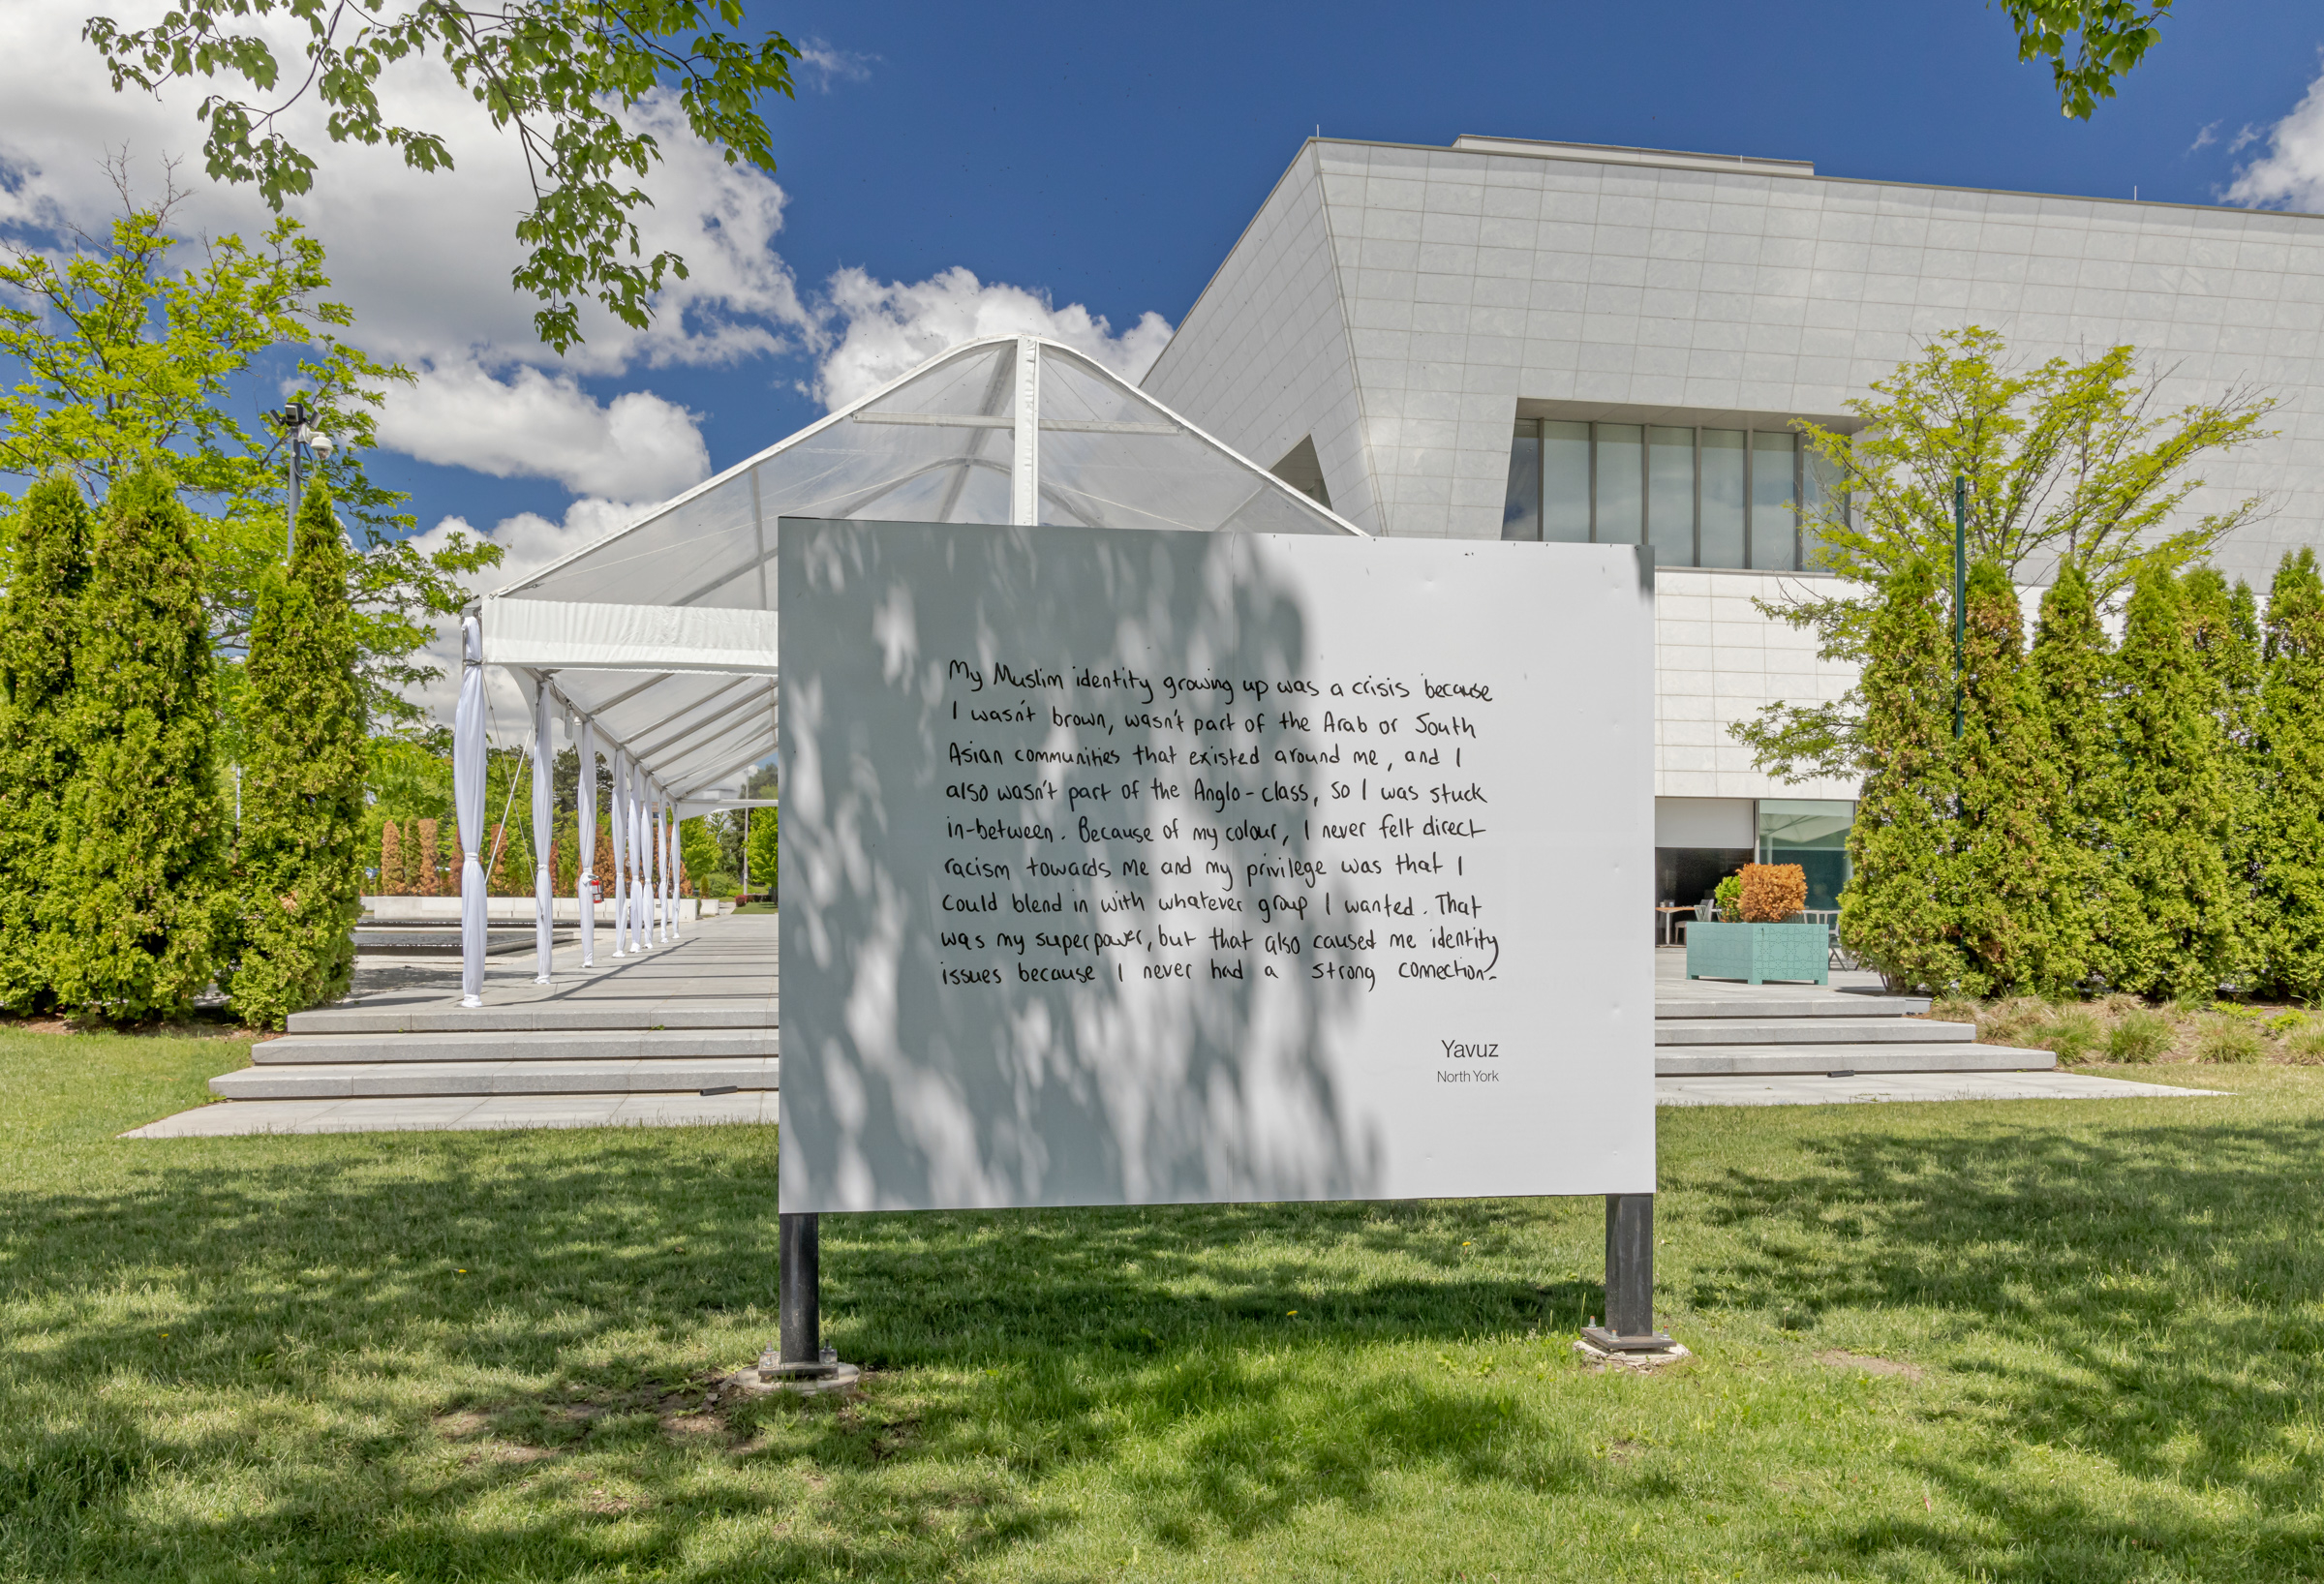     Mahtab Hussain, An Ocean in a Drop: Muslims in Toronto, installation view, Aga Khan Museum and Park, 2022. Courtesy of the artist, Aga Khan Museum, and CONTACT. Photo: Toni Hafkenscheid

